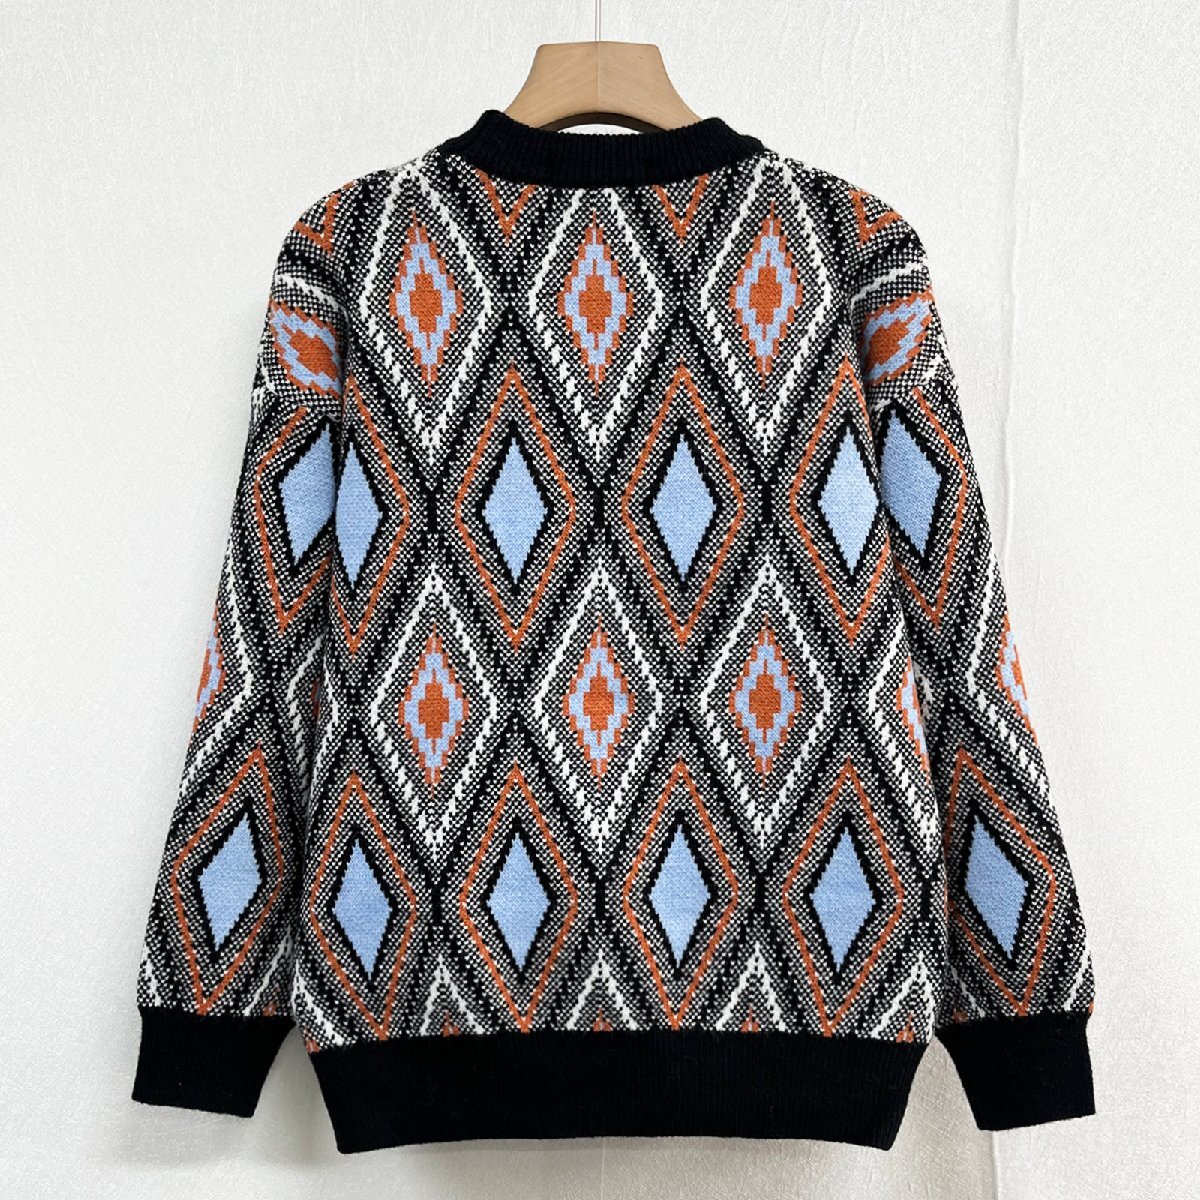  piece . Europe made * regular price 5 ten thousand * BVLGARY a departure *RISELIN sweater wool . soft comfortable thick knitted protection against cold total pattern retro standard tops L/48